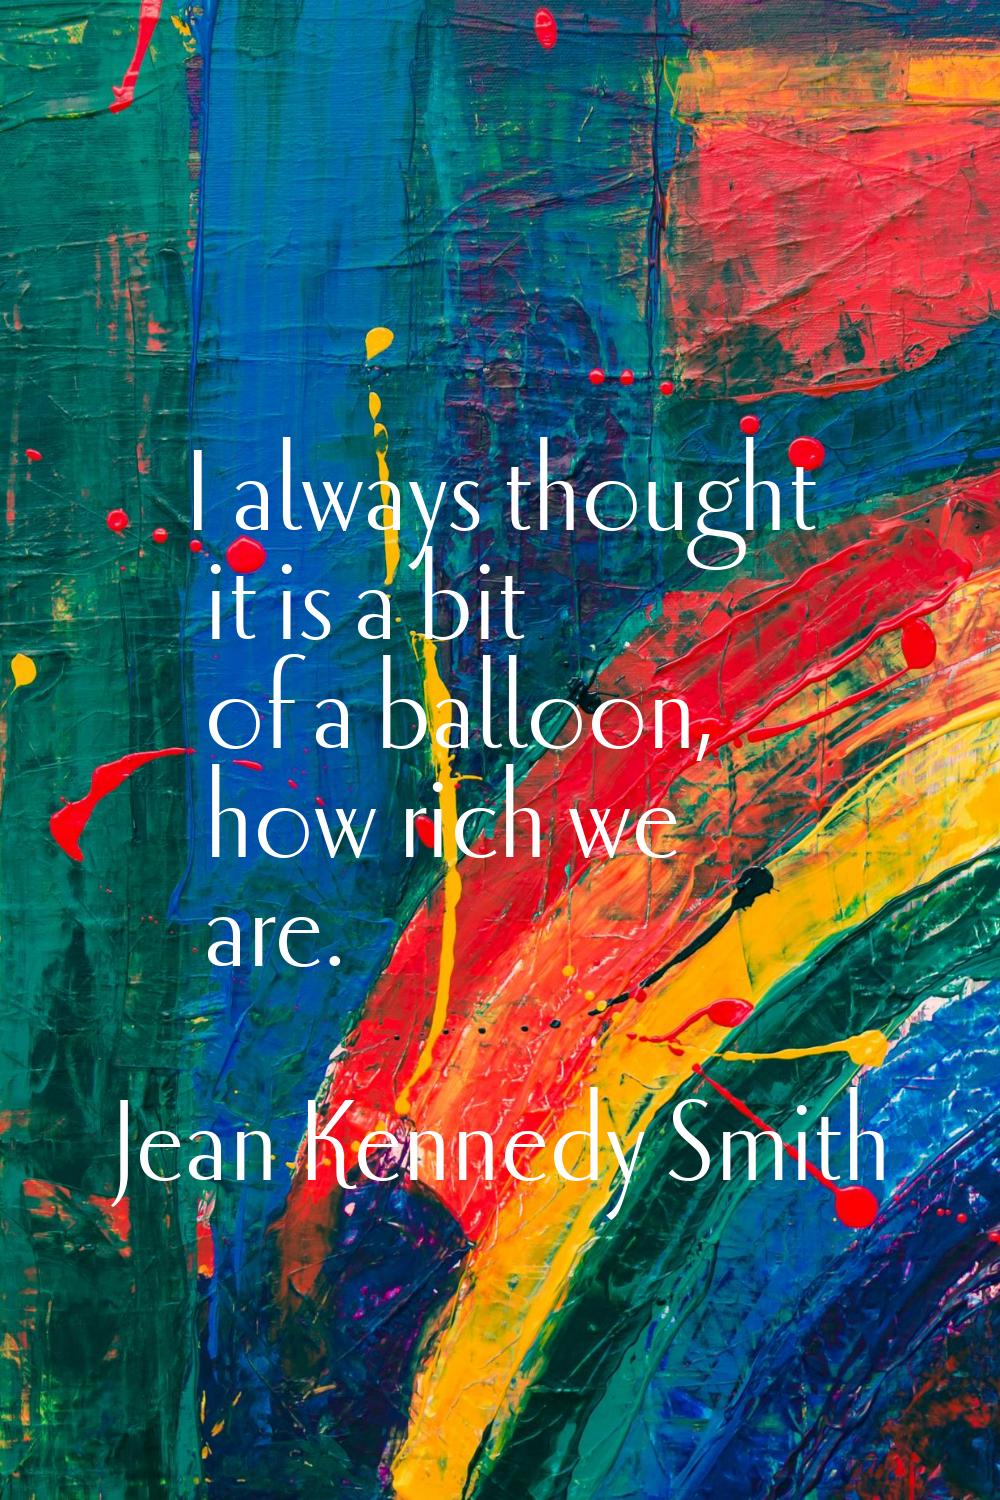 I always thought it is a bit of a balloon, how rich we are.